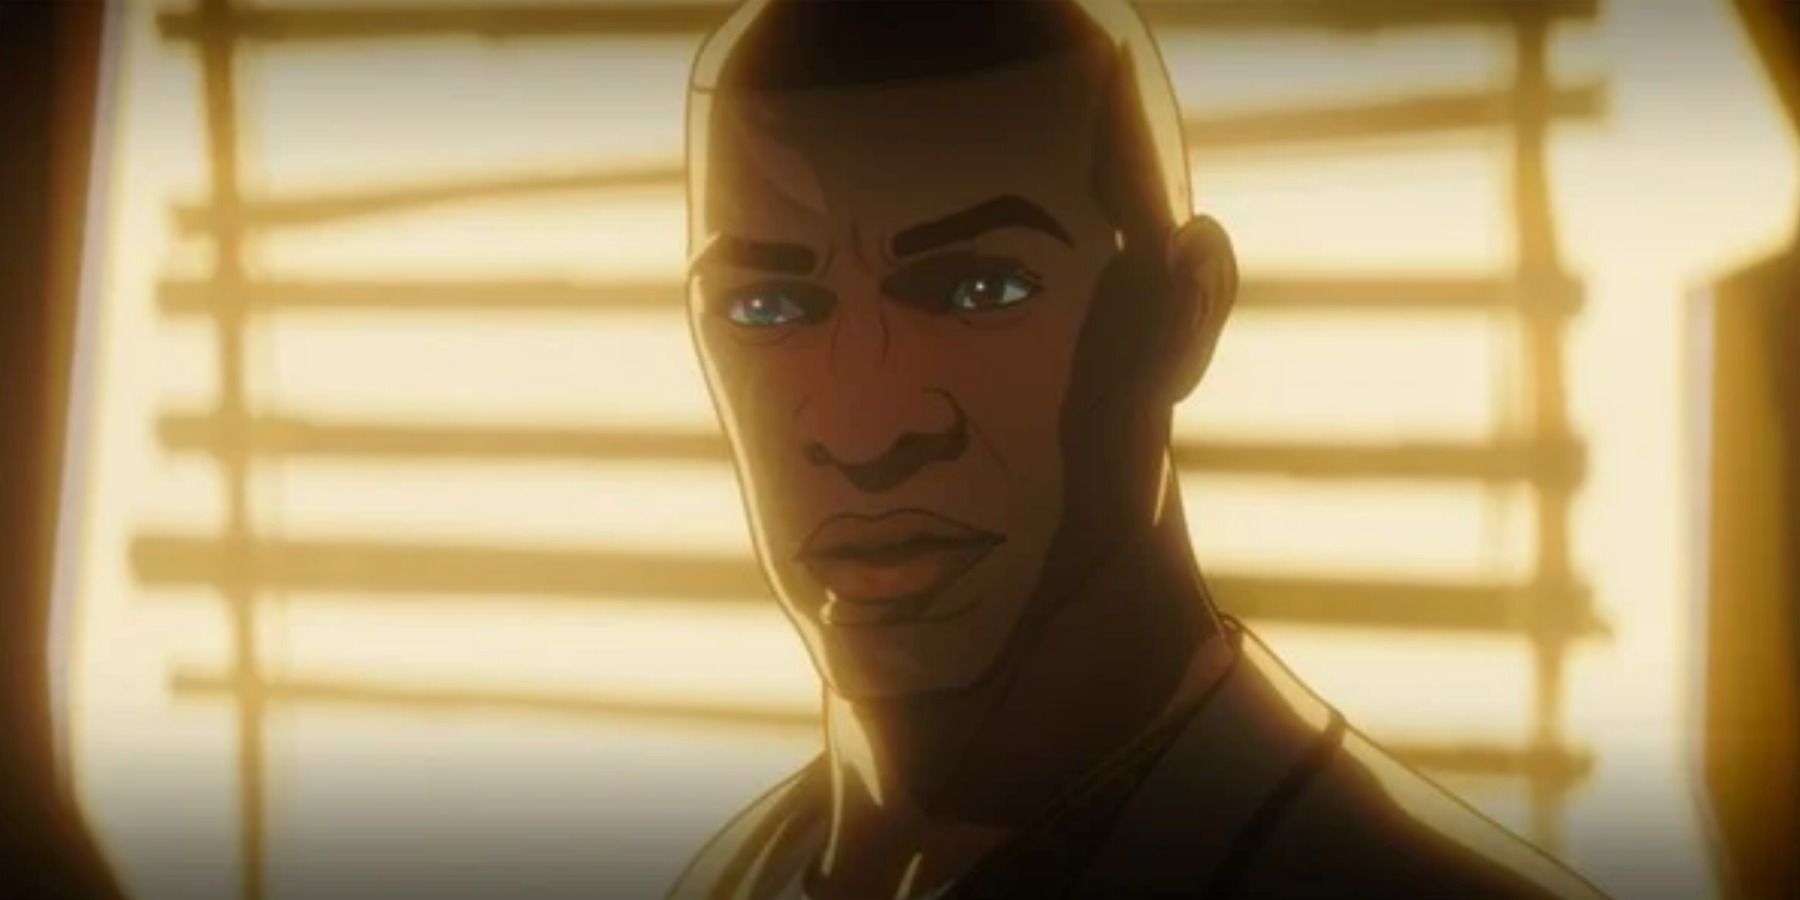 O-Bengh stands in front of a door illuminated by sunlight in What If episode 4